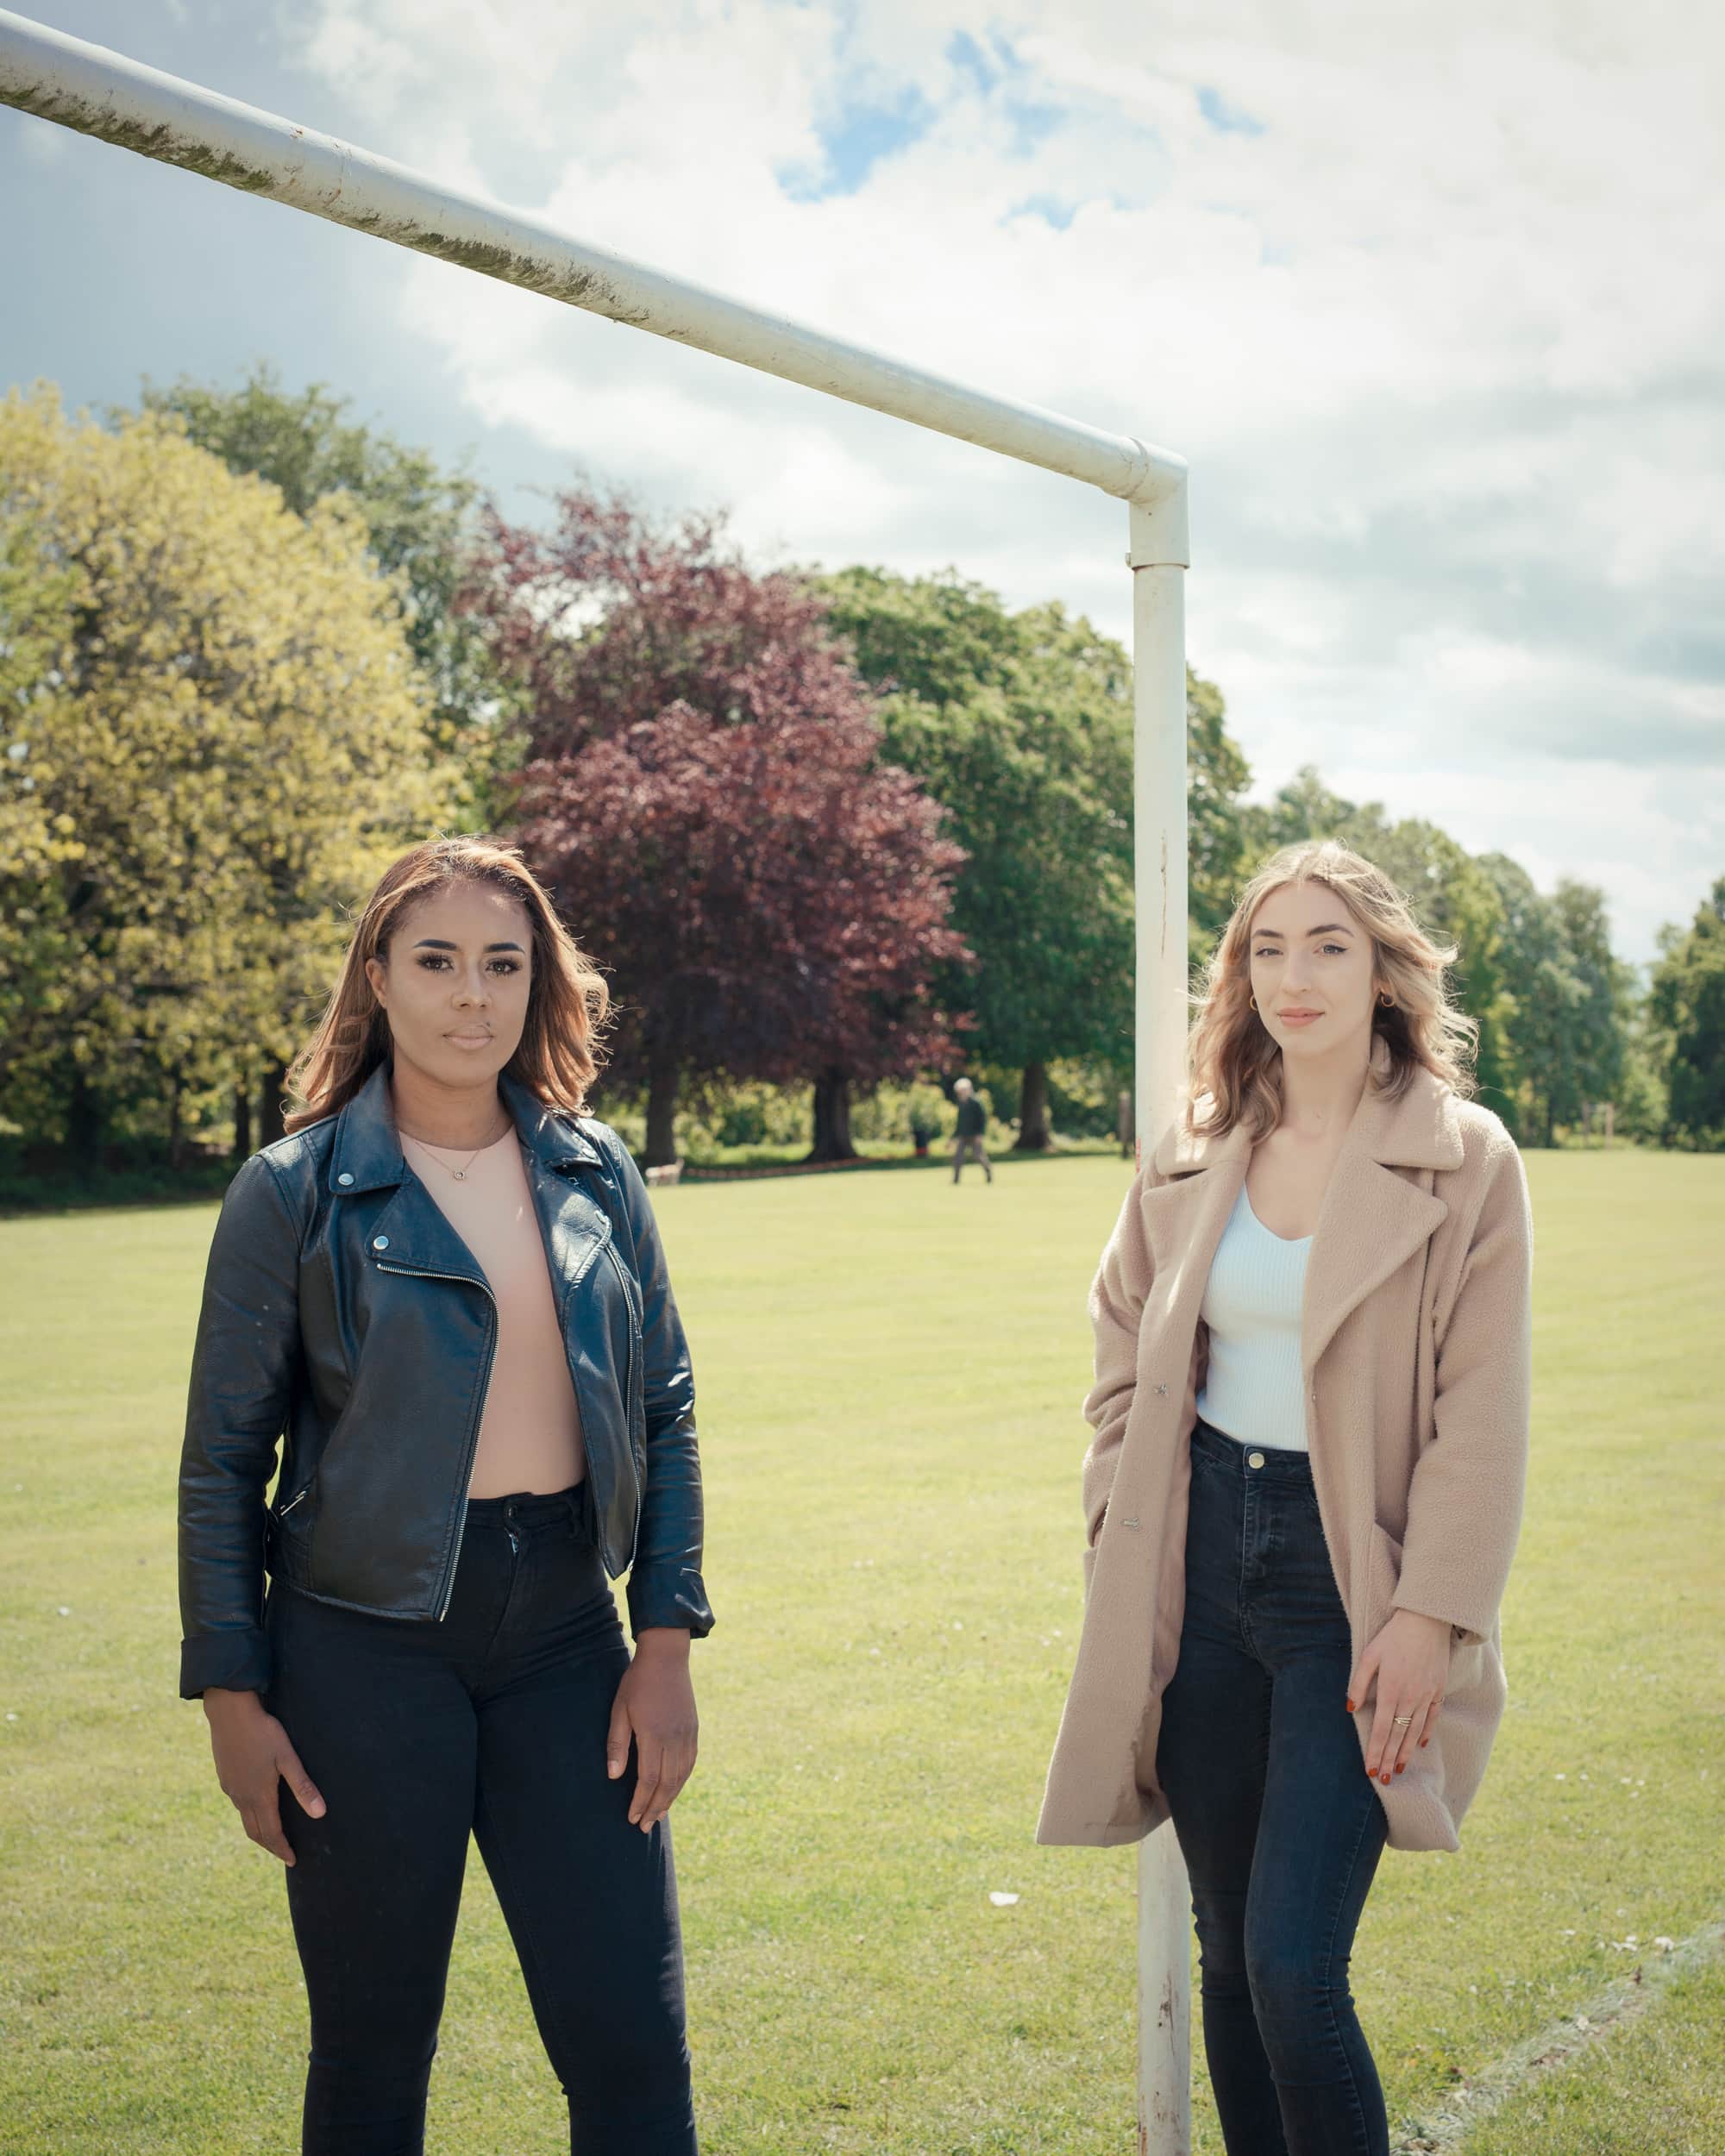 khady gueye and eleni eldridge-tull photographed in Lydney, Forest of Dean for the observer. They organised a BLM event in June 2020 at Bathurst park